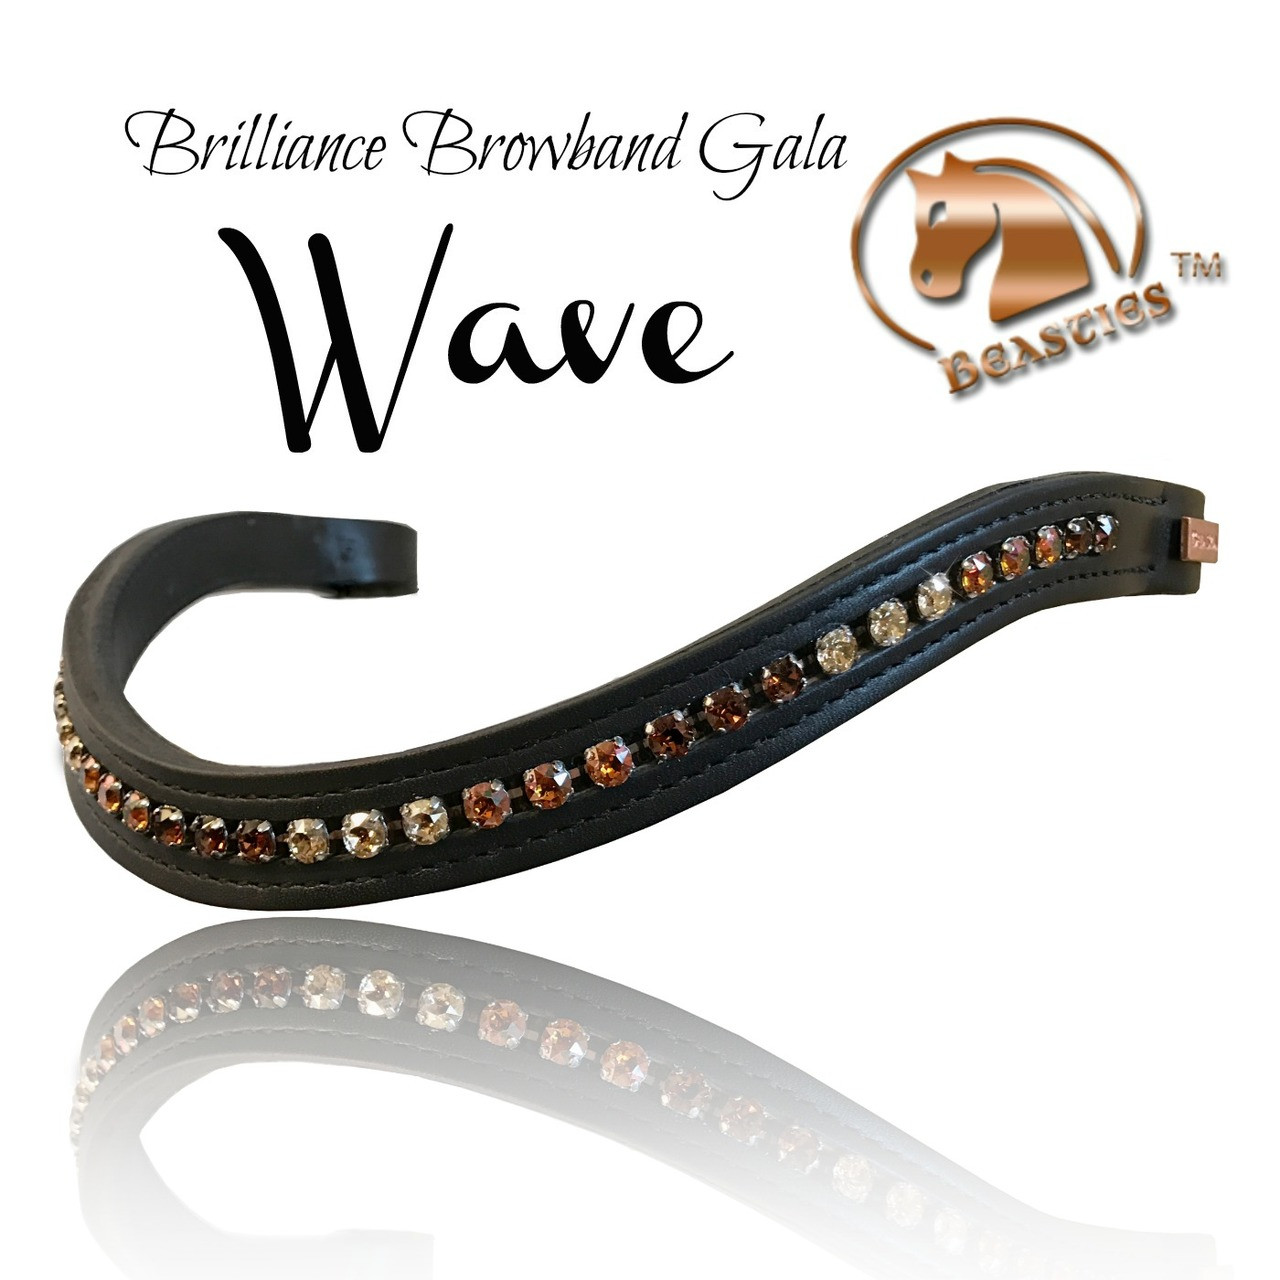 New Sparkly Curve shape Browband ideal for dressage showing Bridle clear crystal 